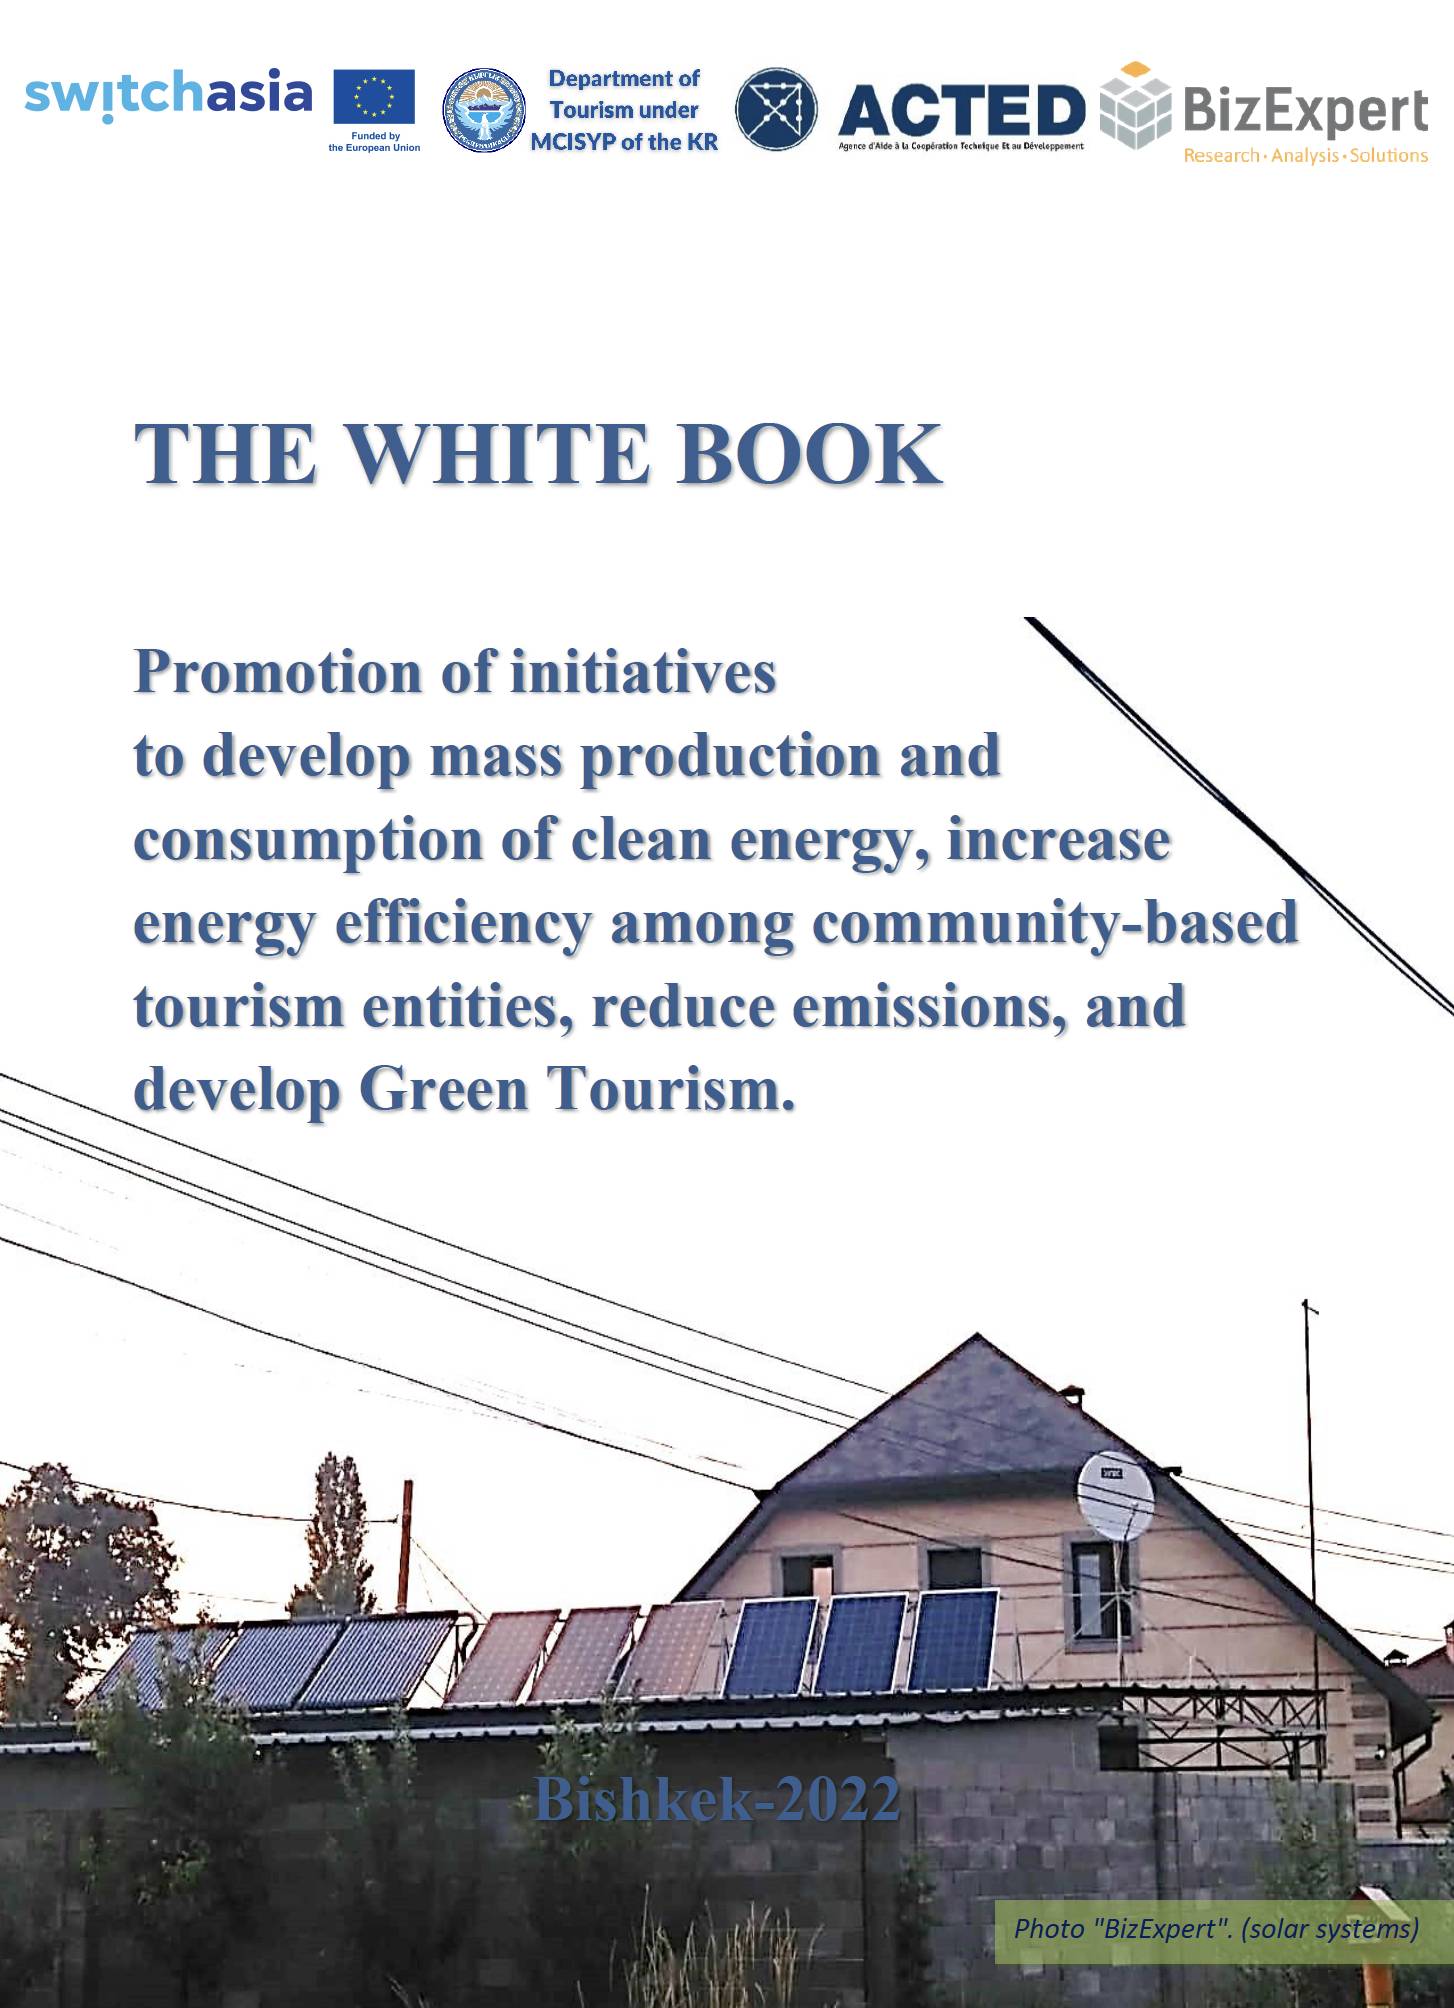 The White Book: Promotion of initiatives to develop mass production and consumption of clean energy,...